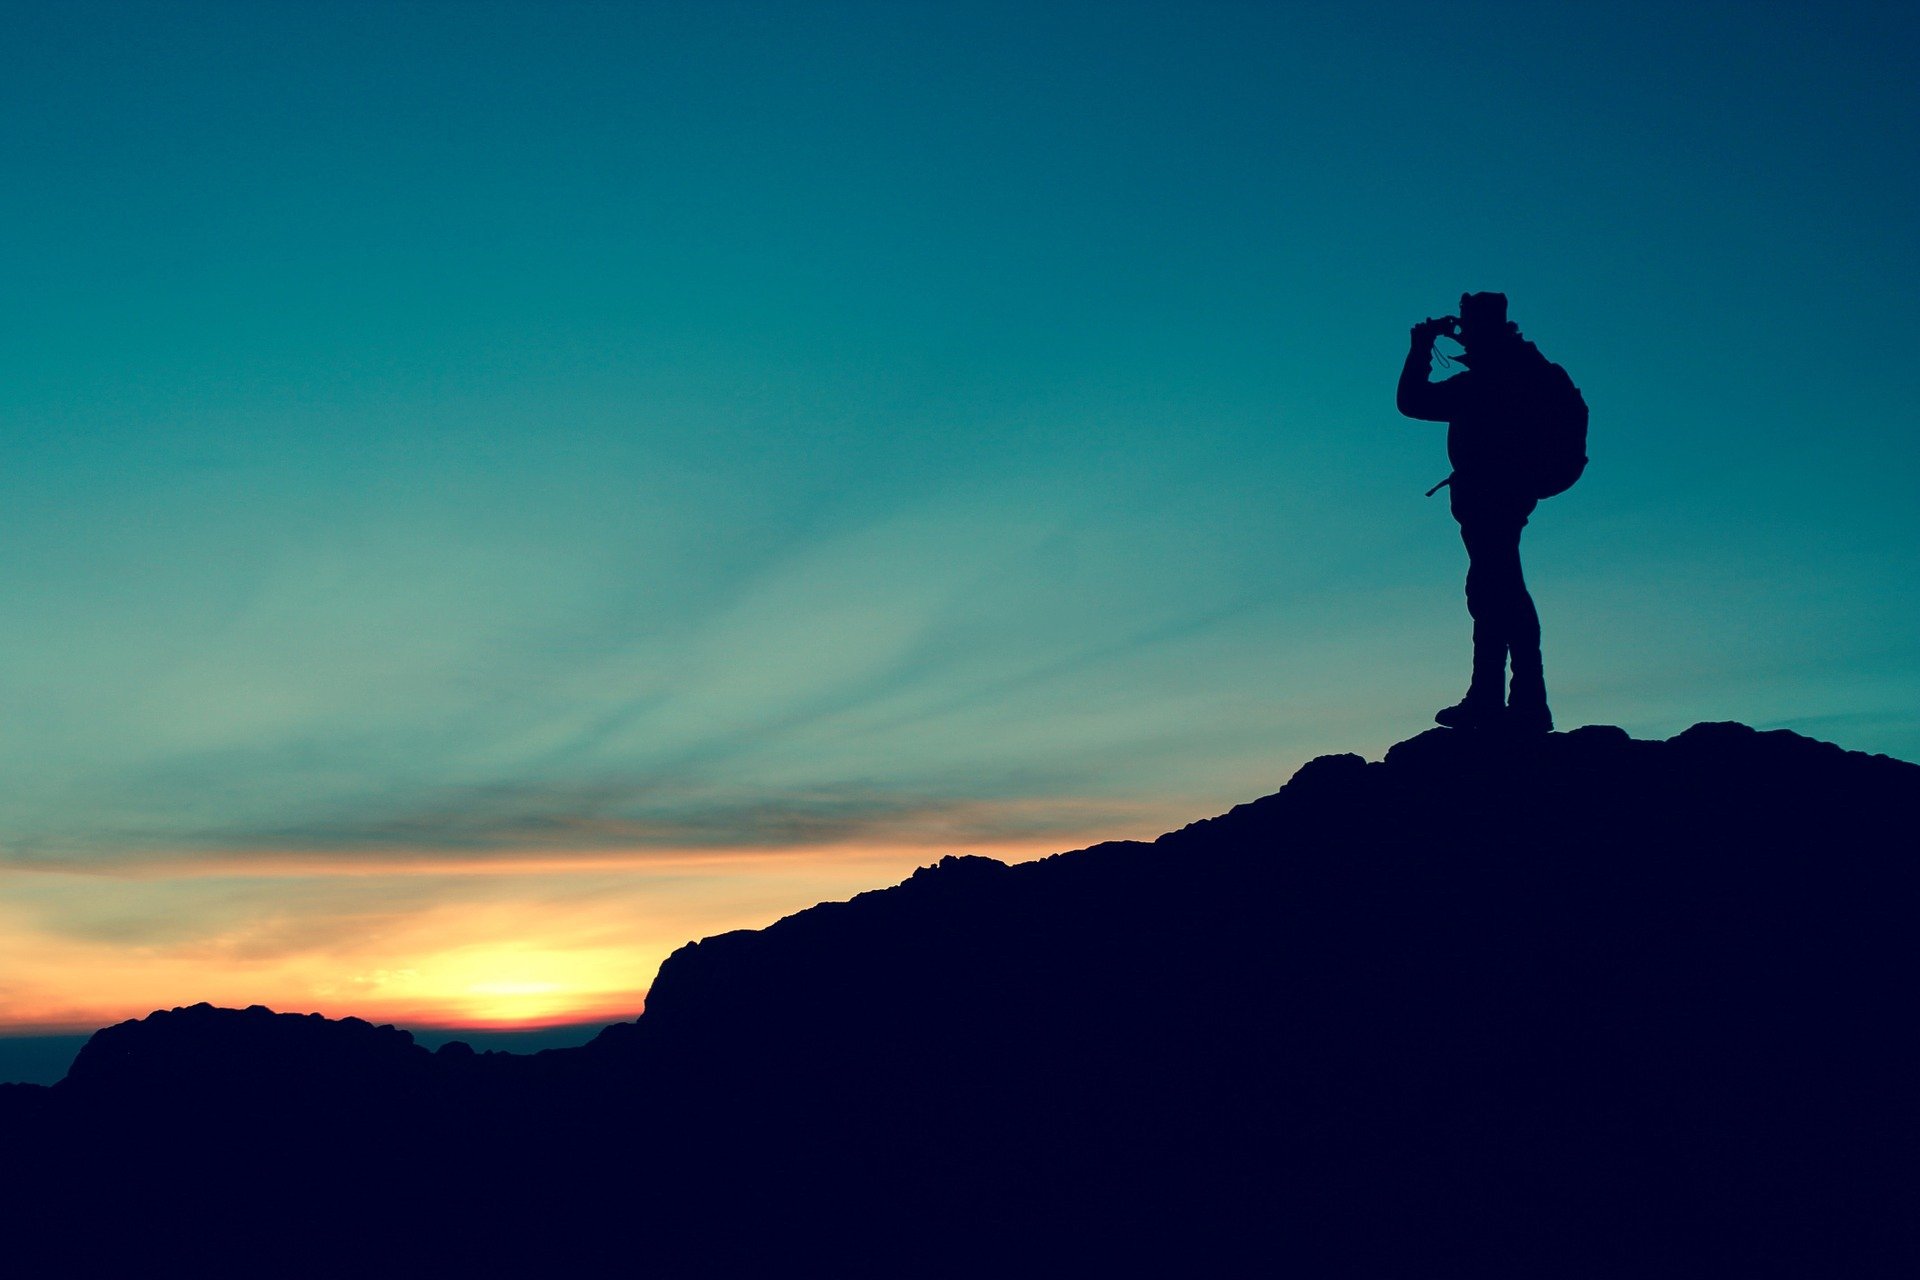 A silhouette of a hiker taking in the views atop a mountain | Photo: Pixabay